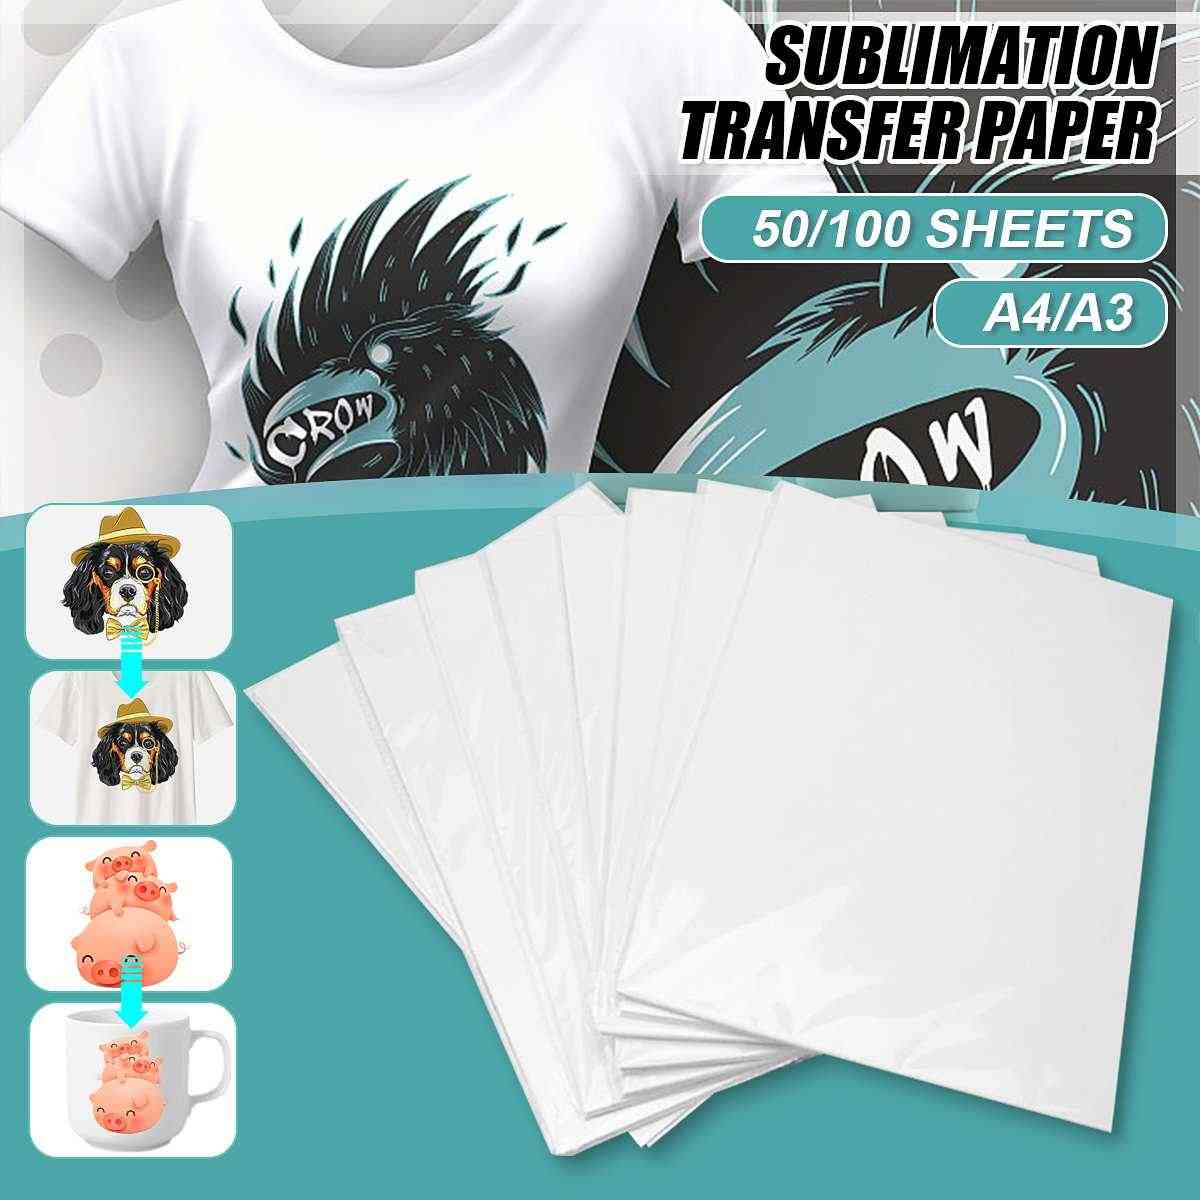 A3/a4 Sublimation Heat Thermal Transfer Printing Paper